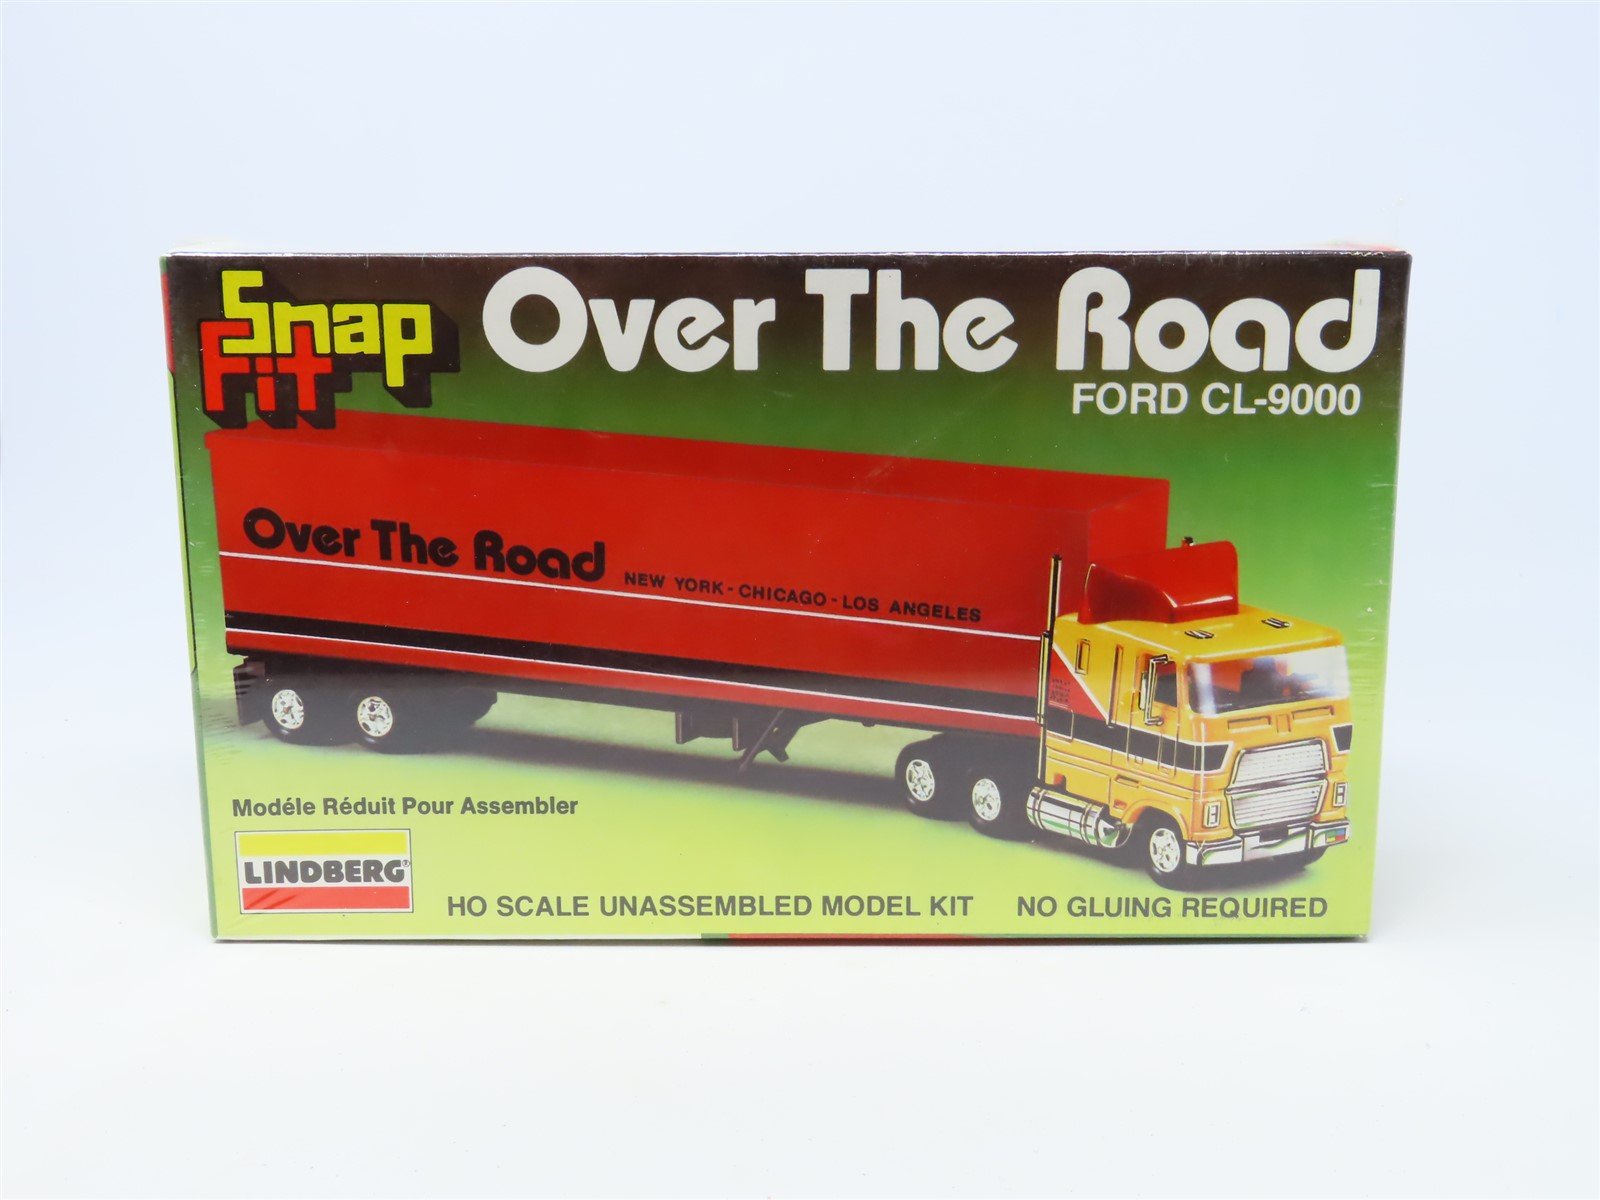 HO 1/87 Scale Lindberg Kit #1047 Ford CL-9000 "Over The Road" Tractor Trailer